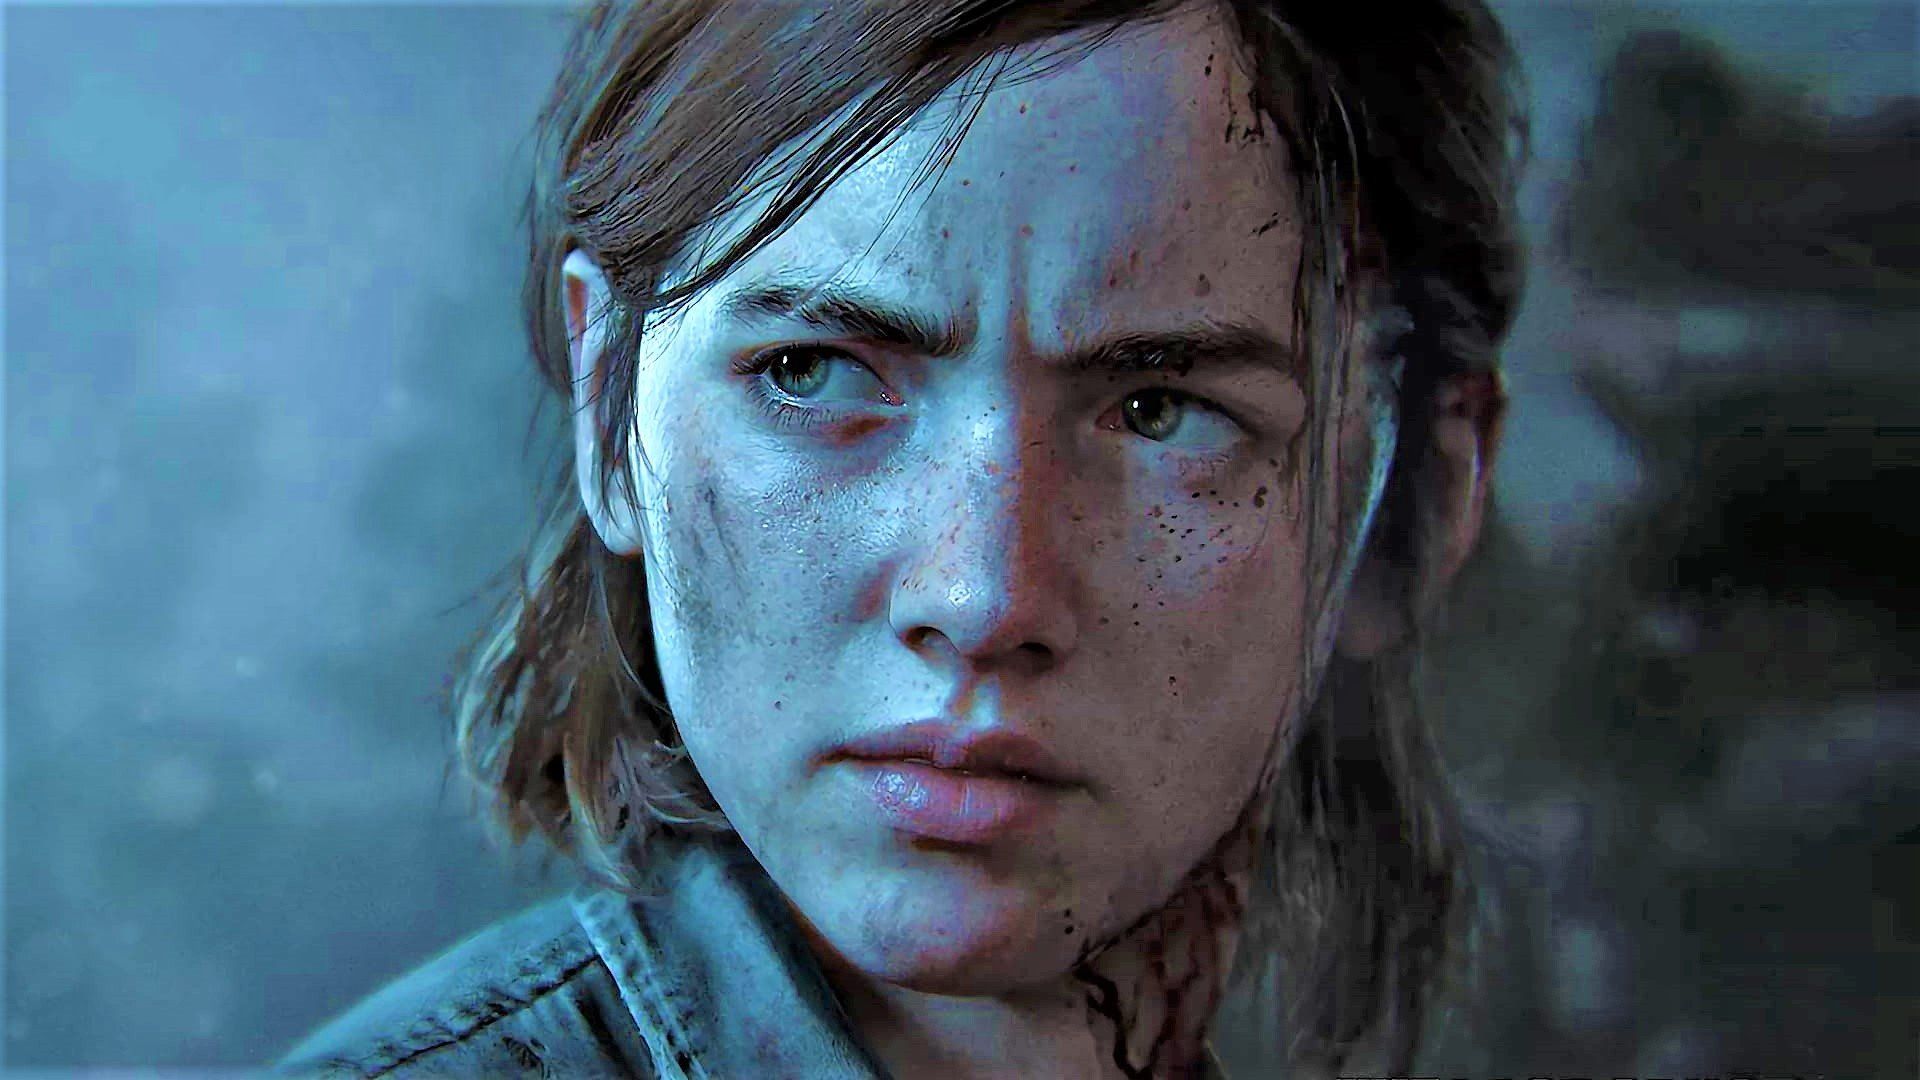 New Ellie The Last of Us 2 4K HD Games Wallpapers, HD Wallpapers